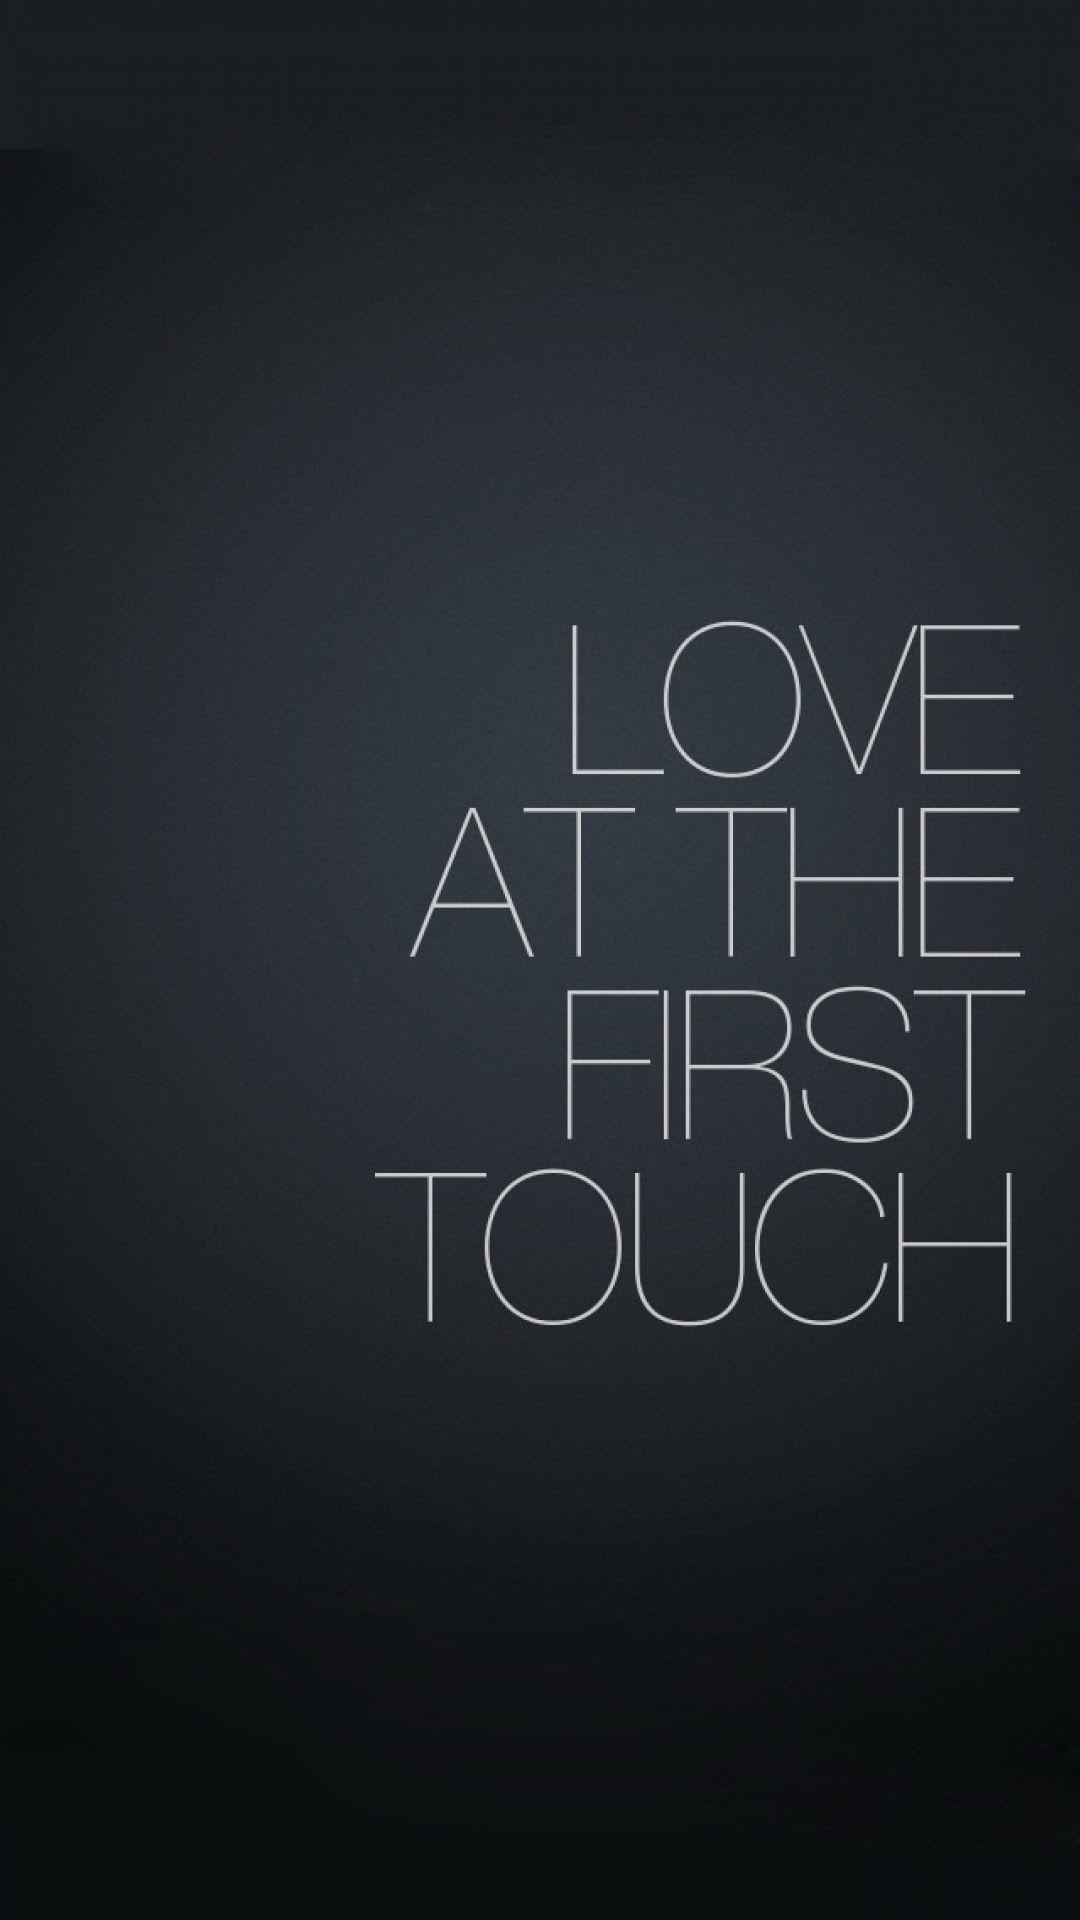 Galaxy Note HD Wallpaper: Love At The First Tough Galaxy Note HD